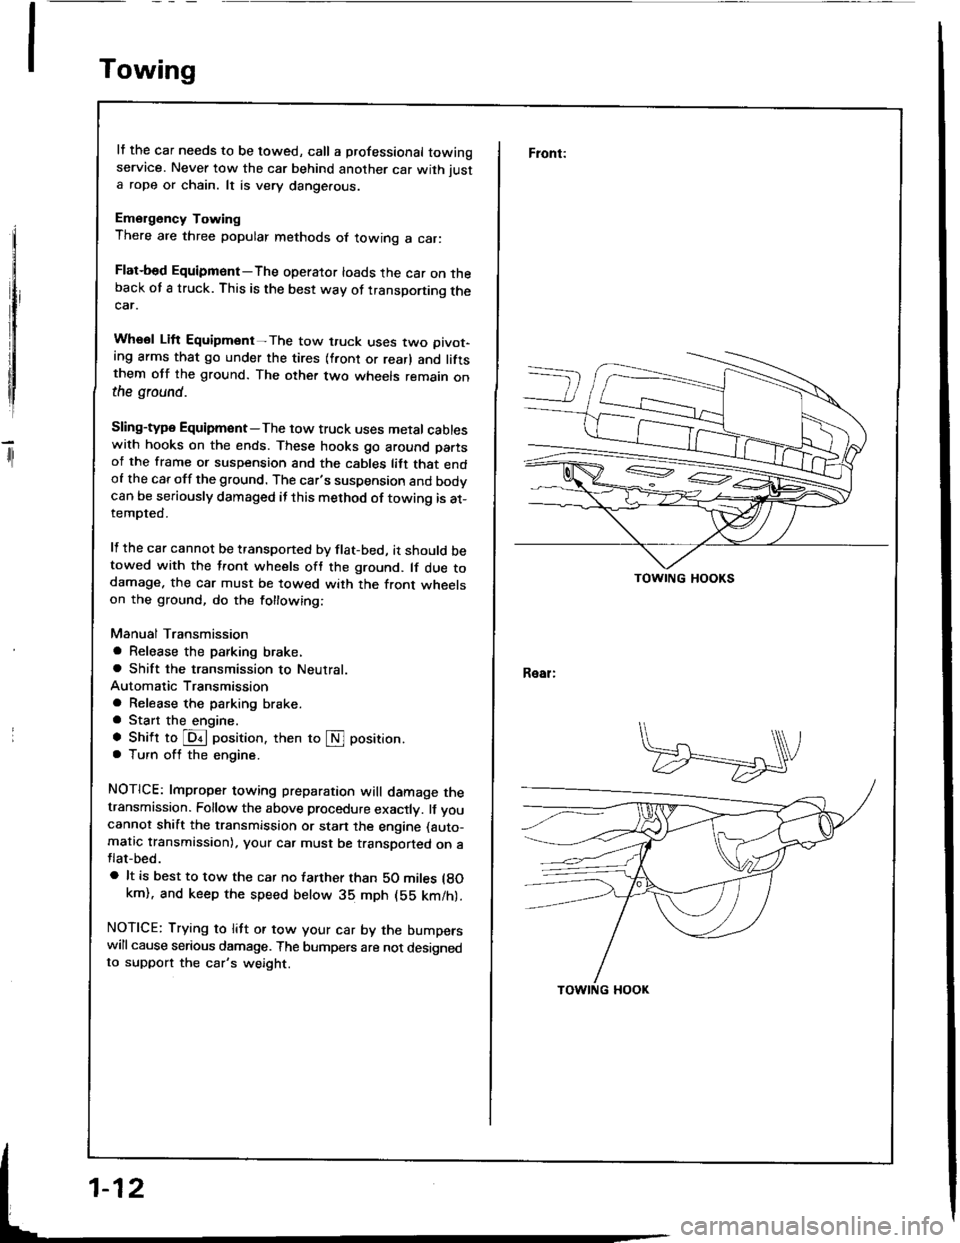 ACURA INTEGRA 1994  Service Repair Manual Towing
rl
It the car needs to be towed, call a professional towingservice. Never tow the car behind another car with just
a rope or chain. lt is very dange.ous.
Emergency Towing
There are three popula